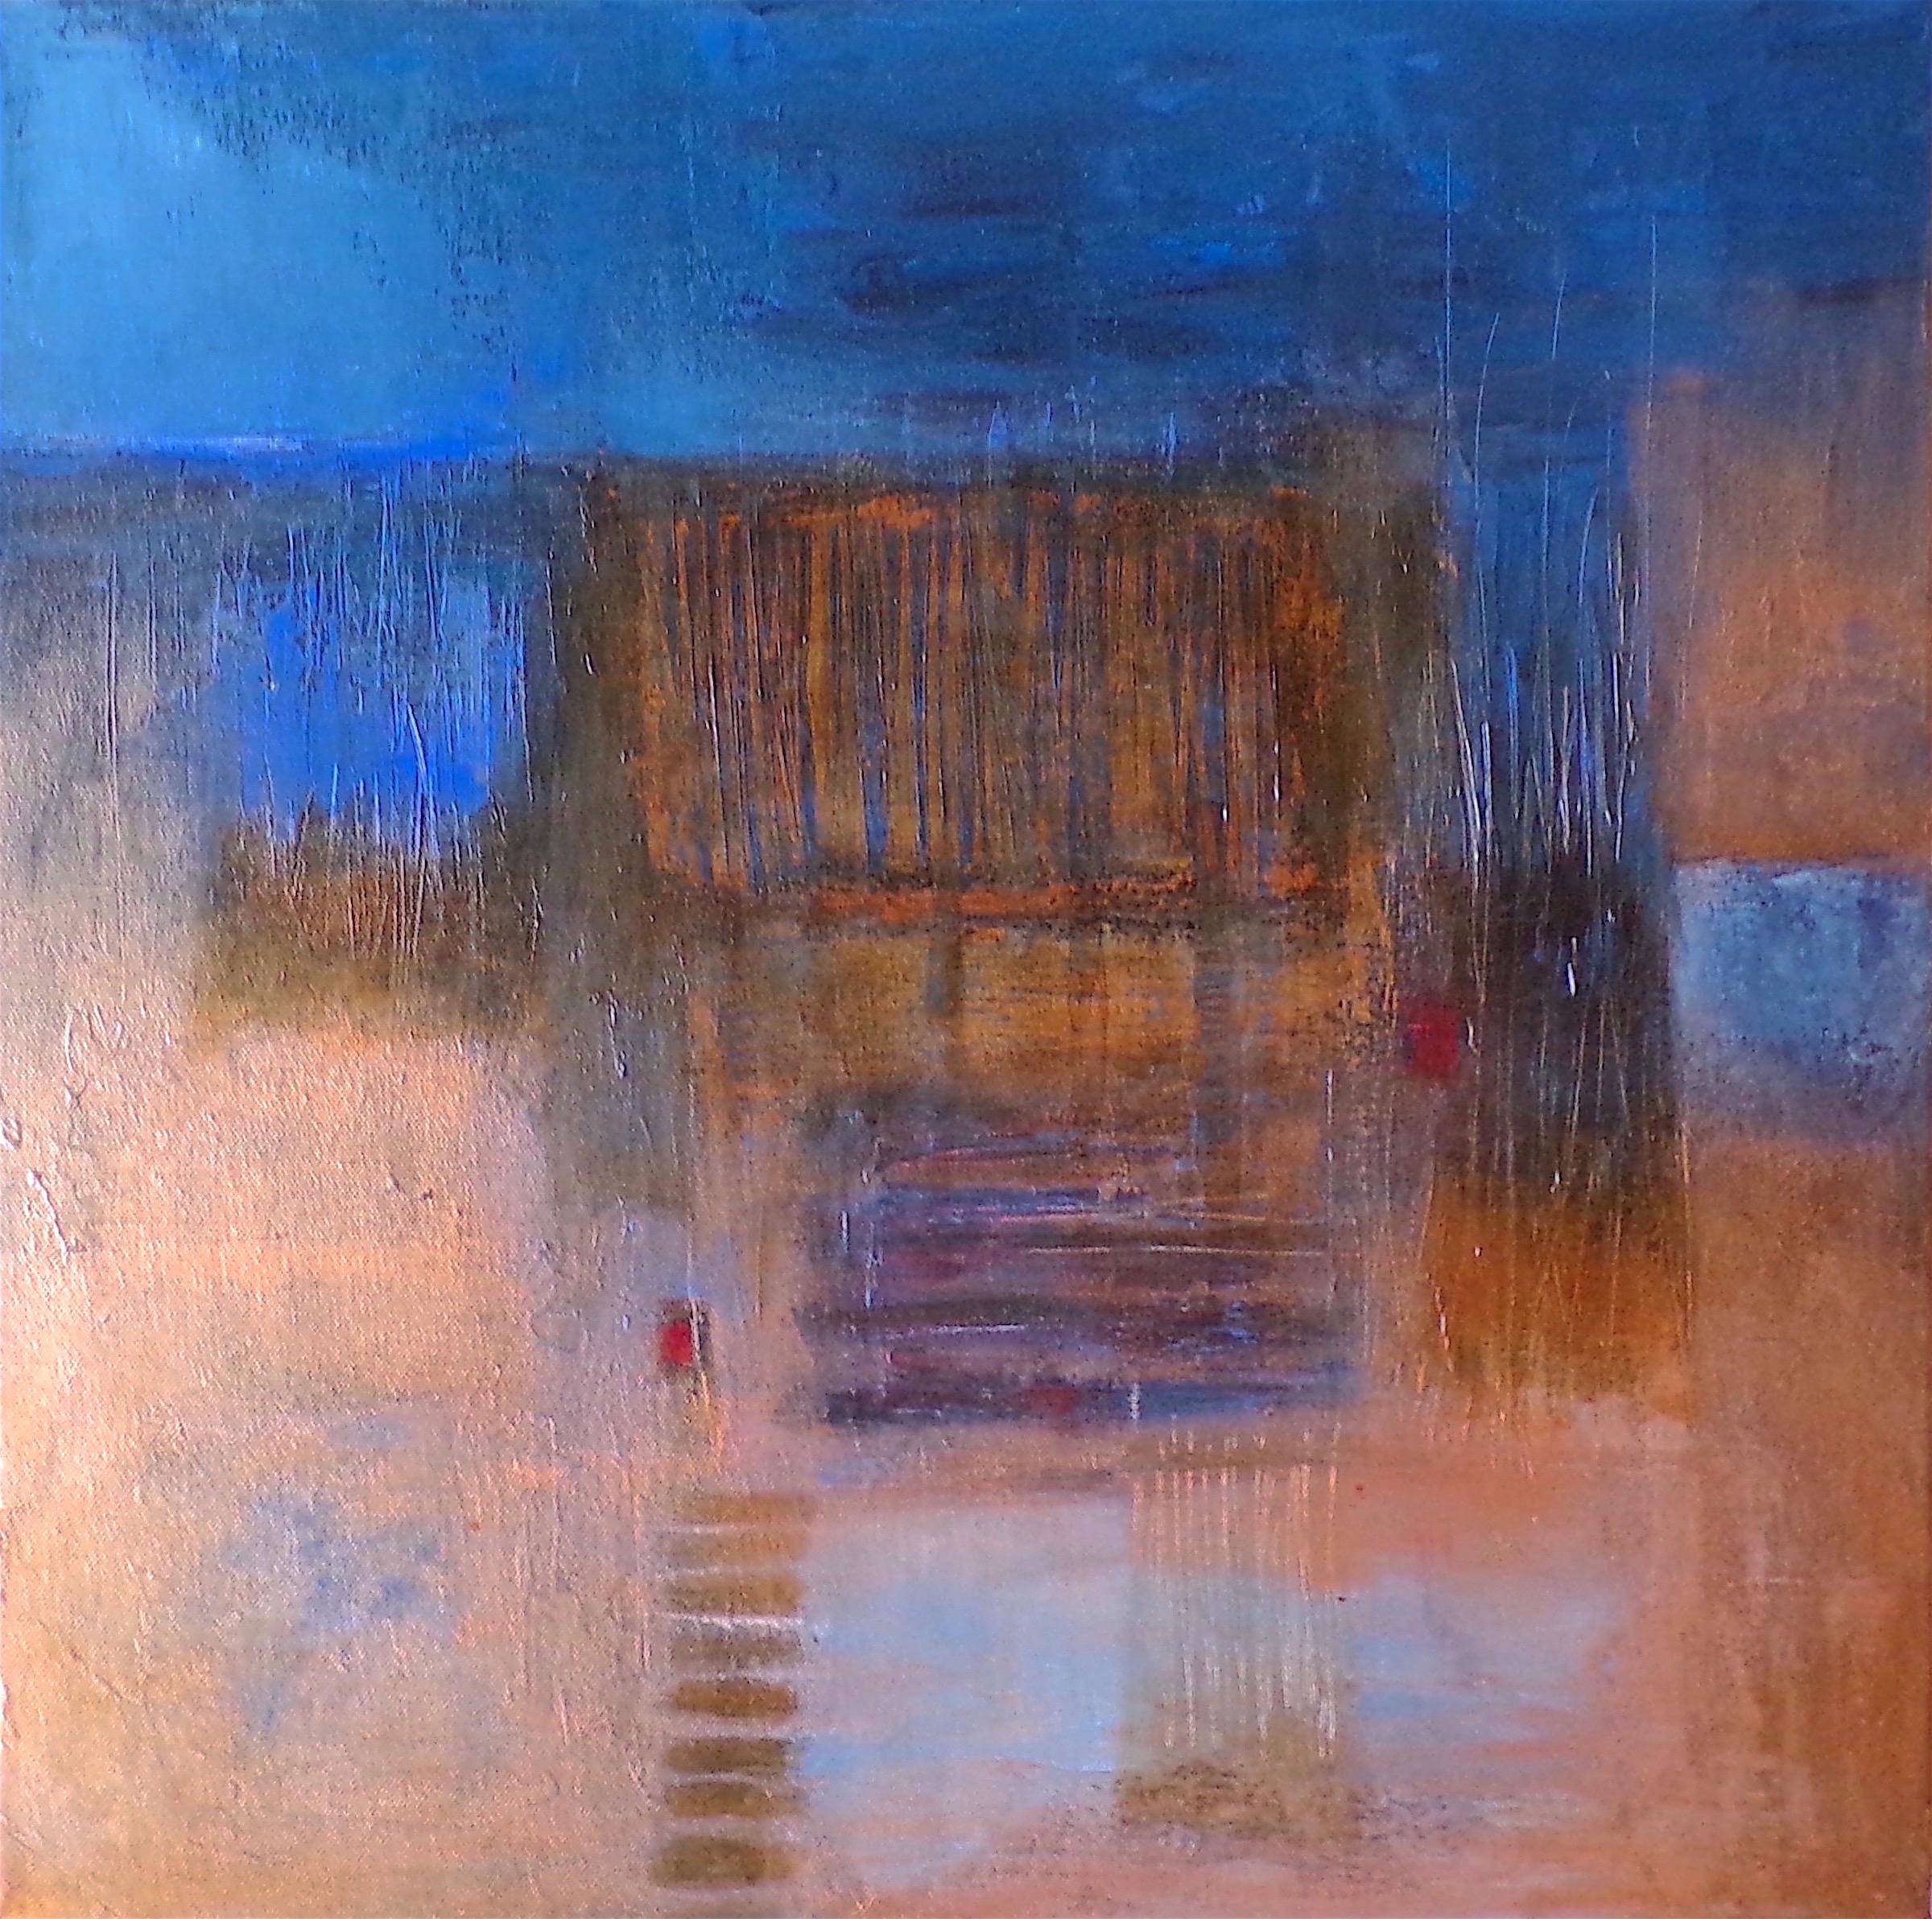 Bronzed Skyline: Contemporary abstract expressionist oil painting